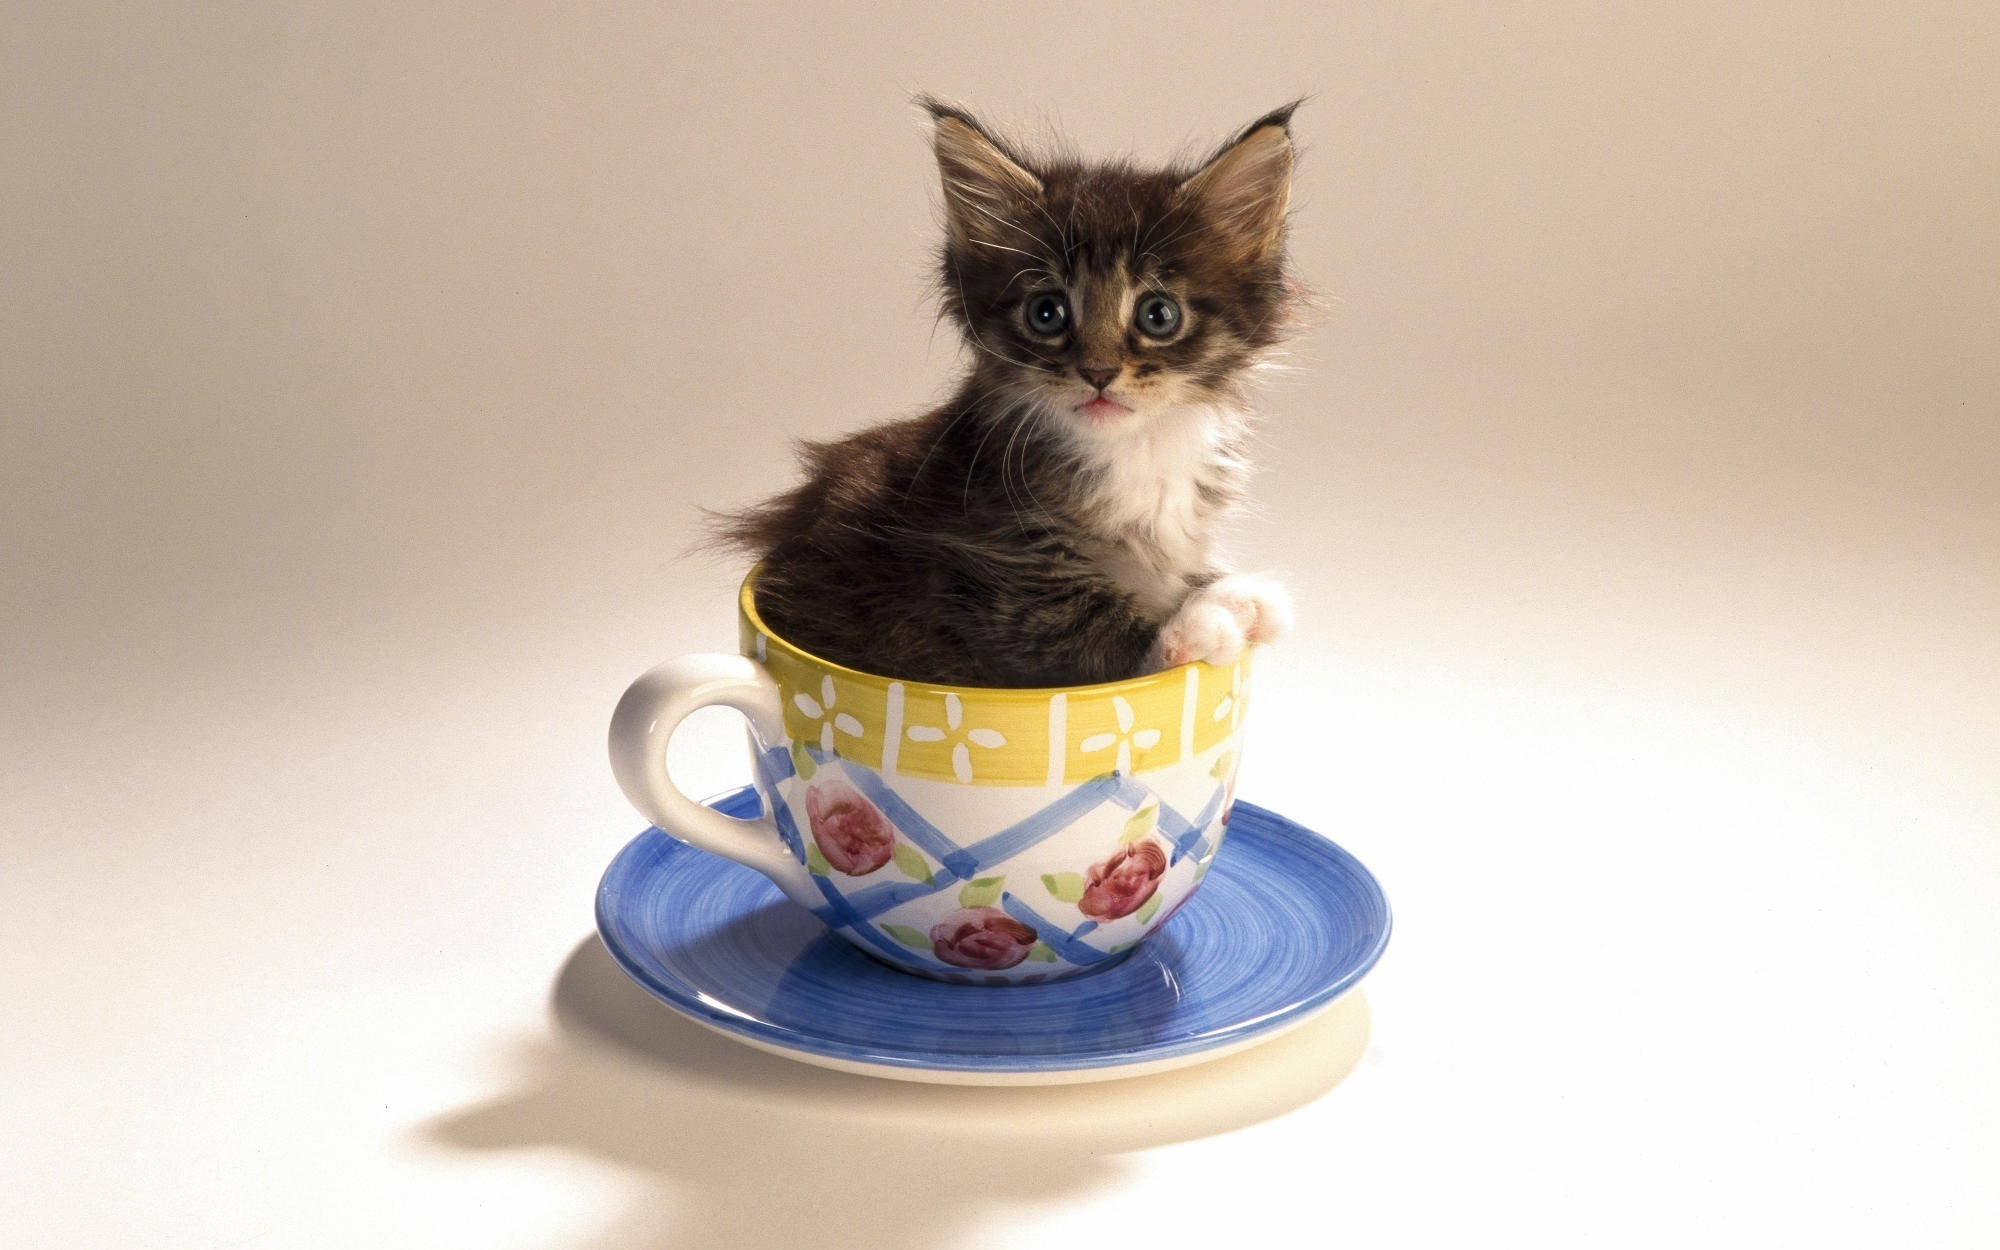 Cute Kitty In Teacup Background